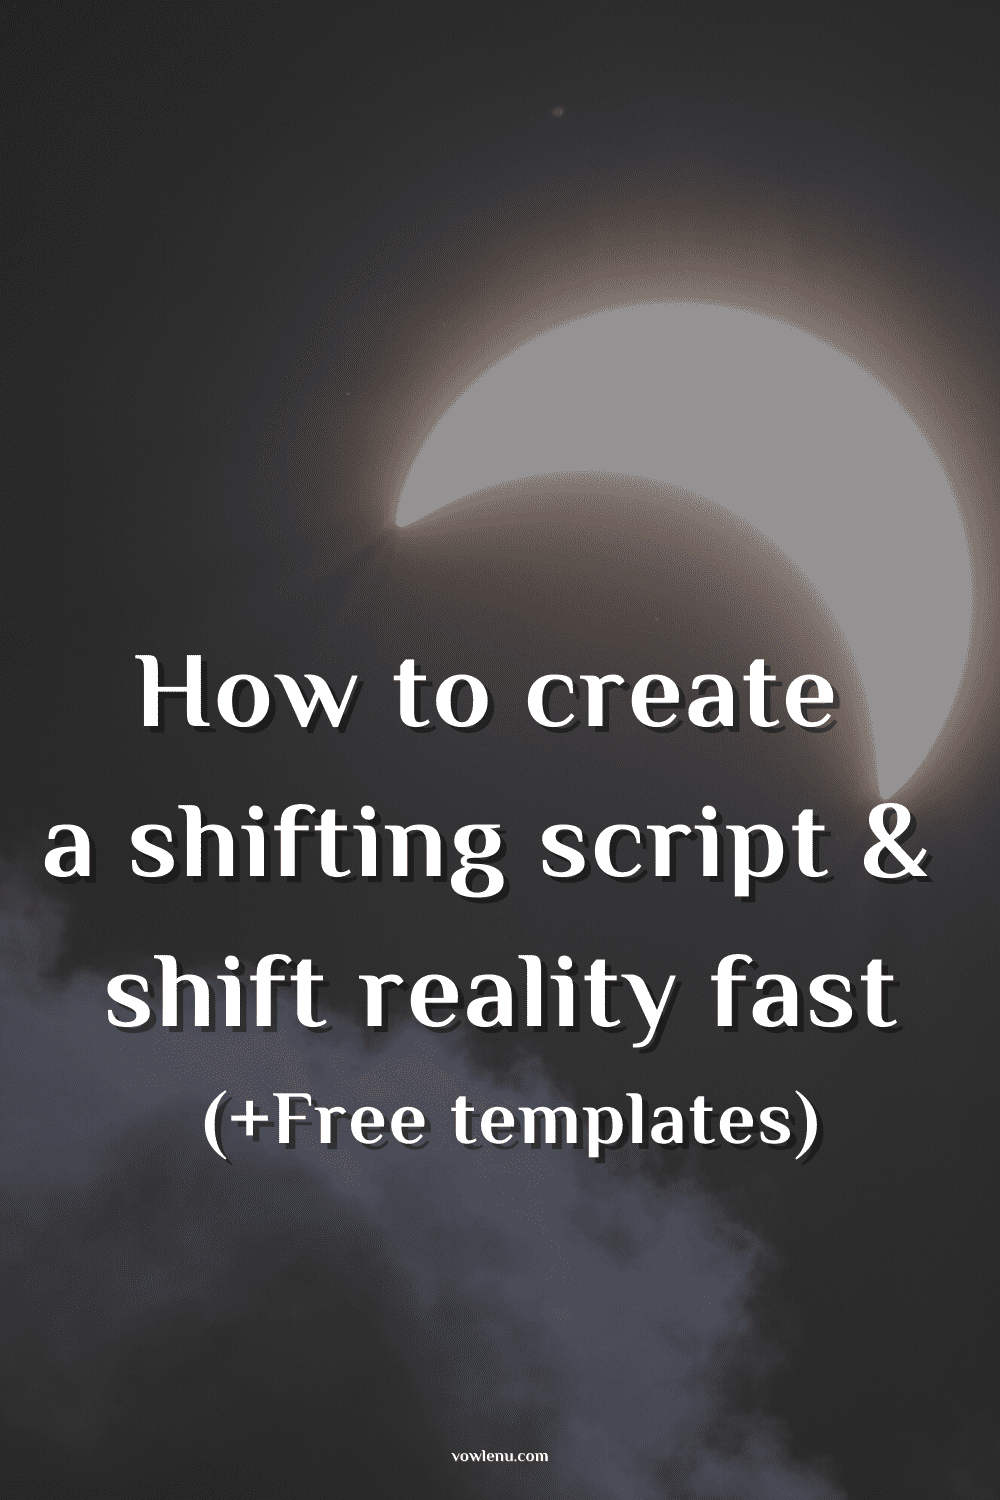 how-to-create-a-shifting-script-shift-fast-free-templates-vowlenu-2022